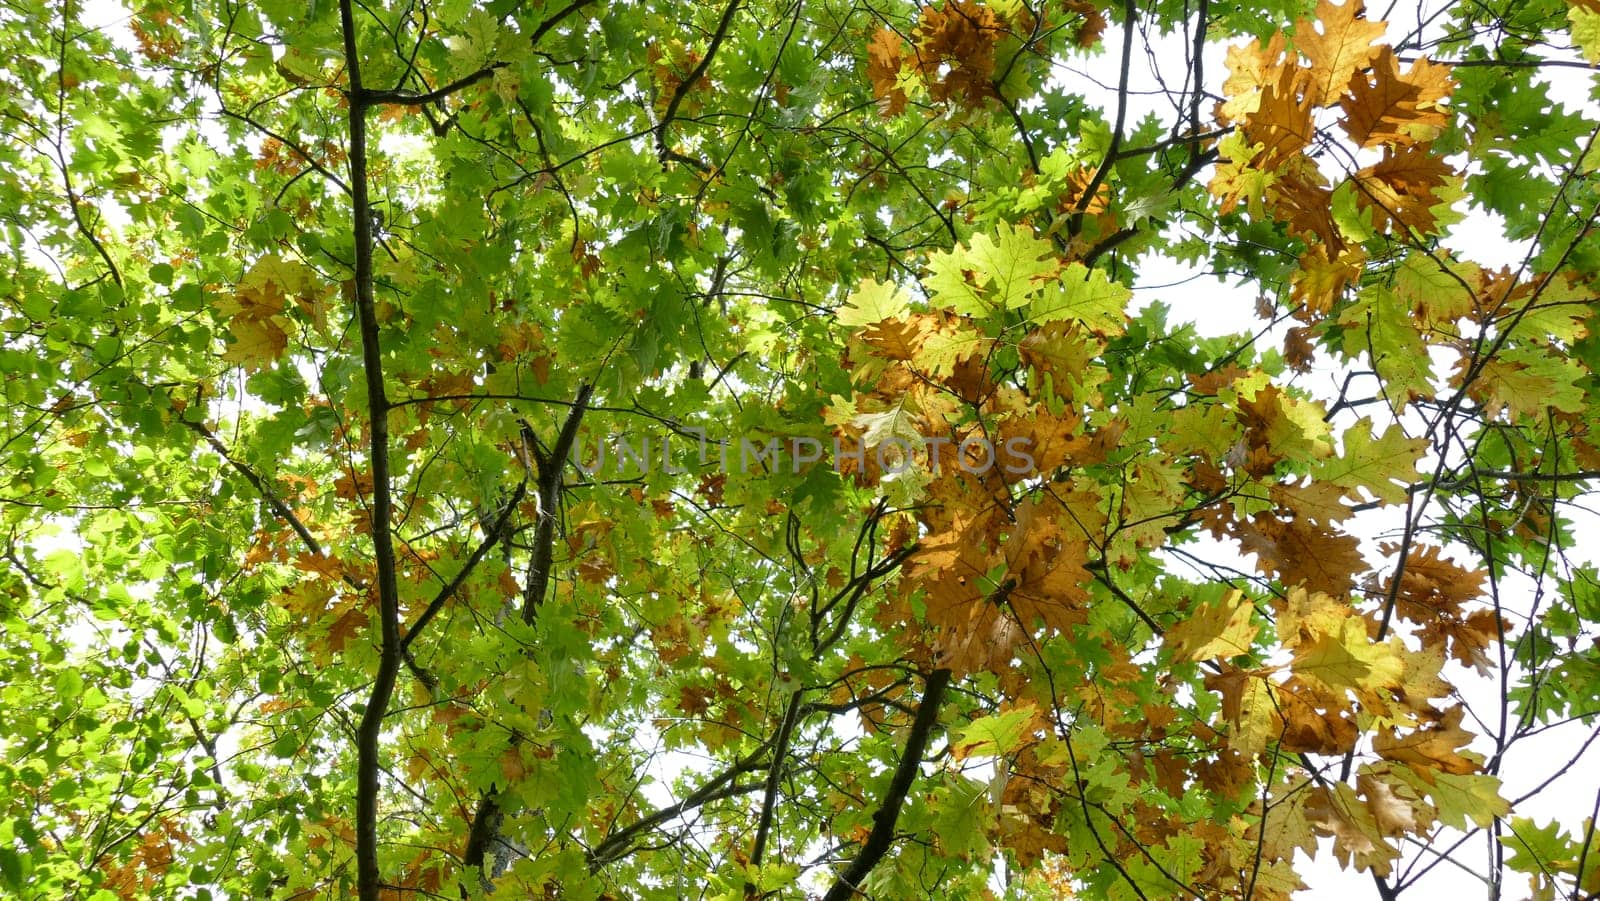 Tree leaves and branches among the forest vegetation. Unedited photograph.